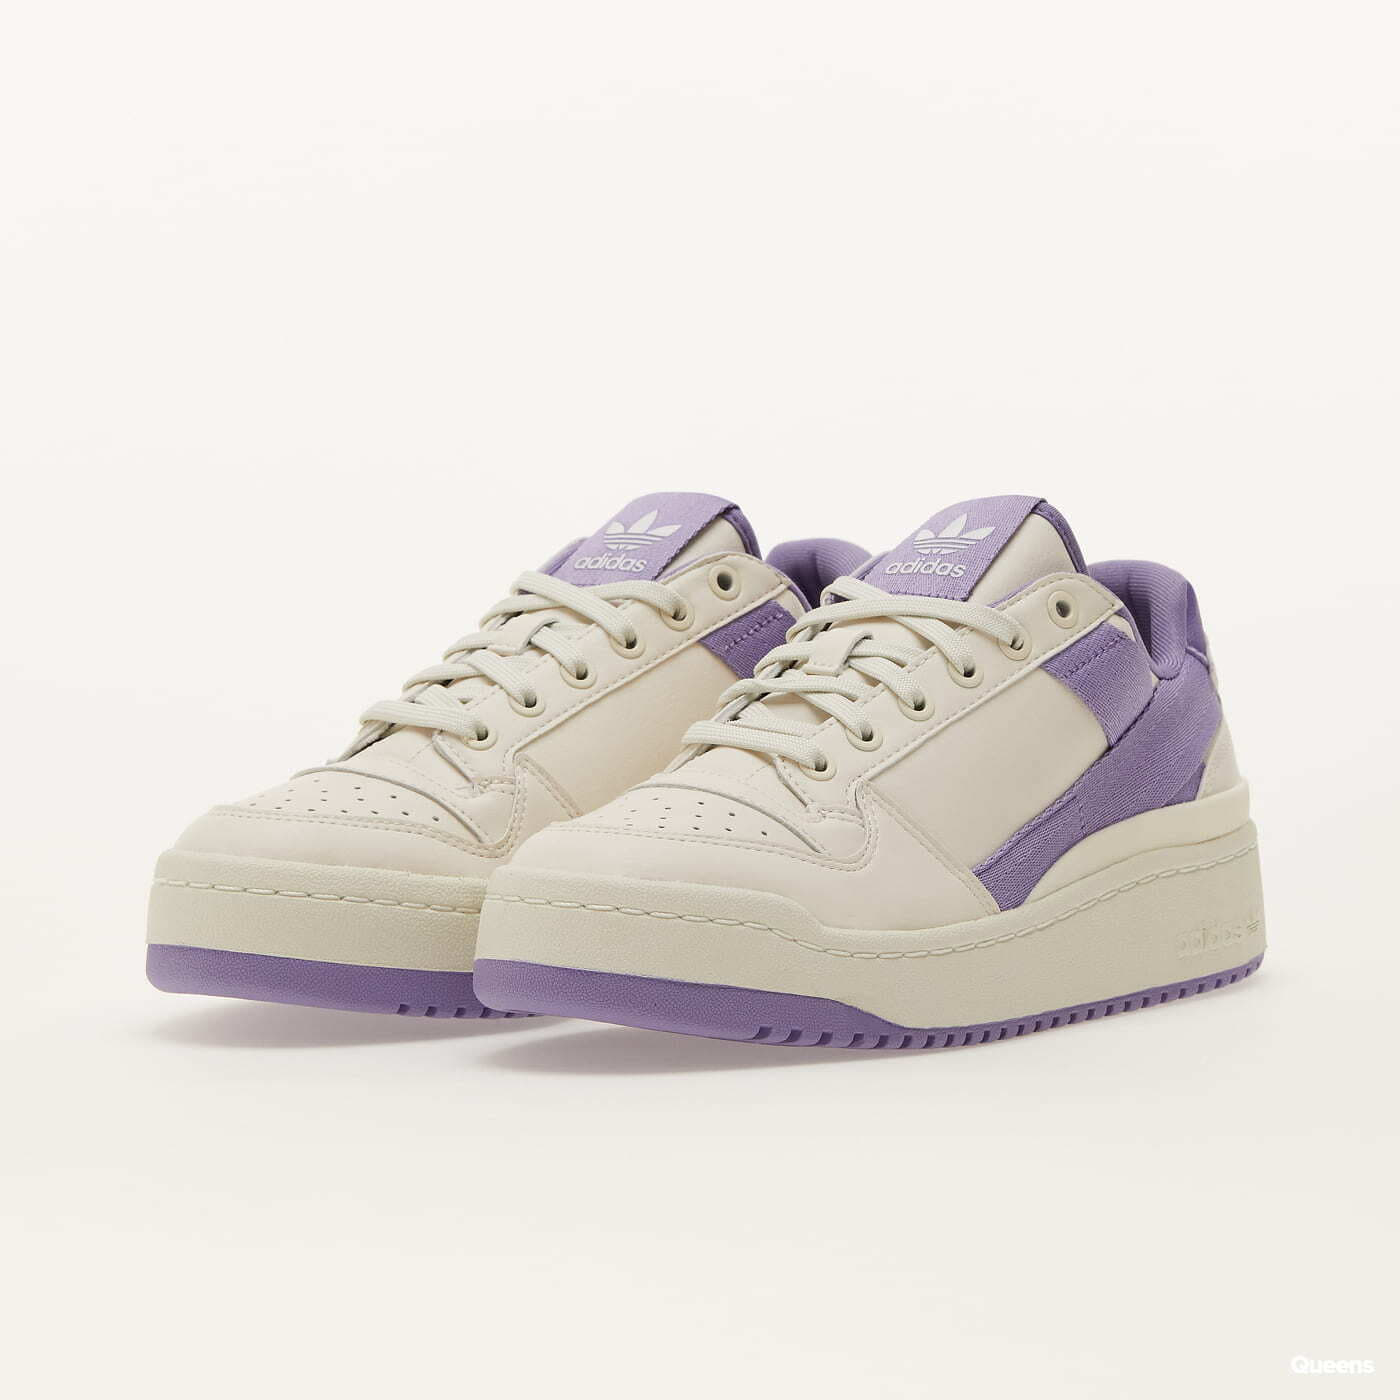 Women's sneakers and shoes adidas Originals Forum Bold W Chalk White/ White Tint/ Magic Lilac